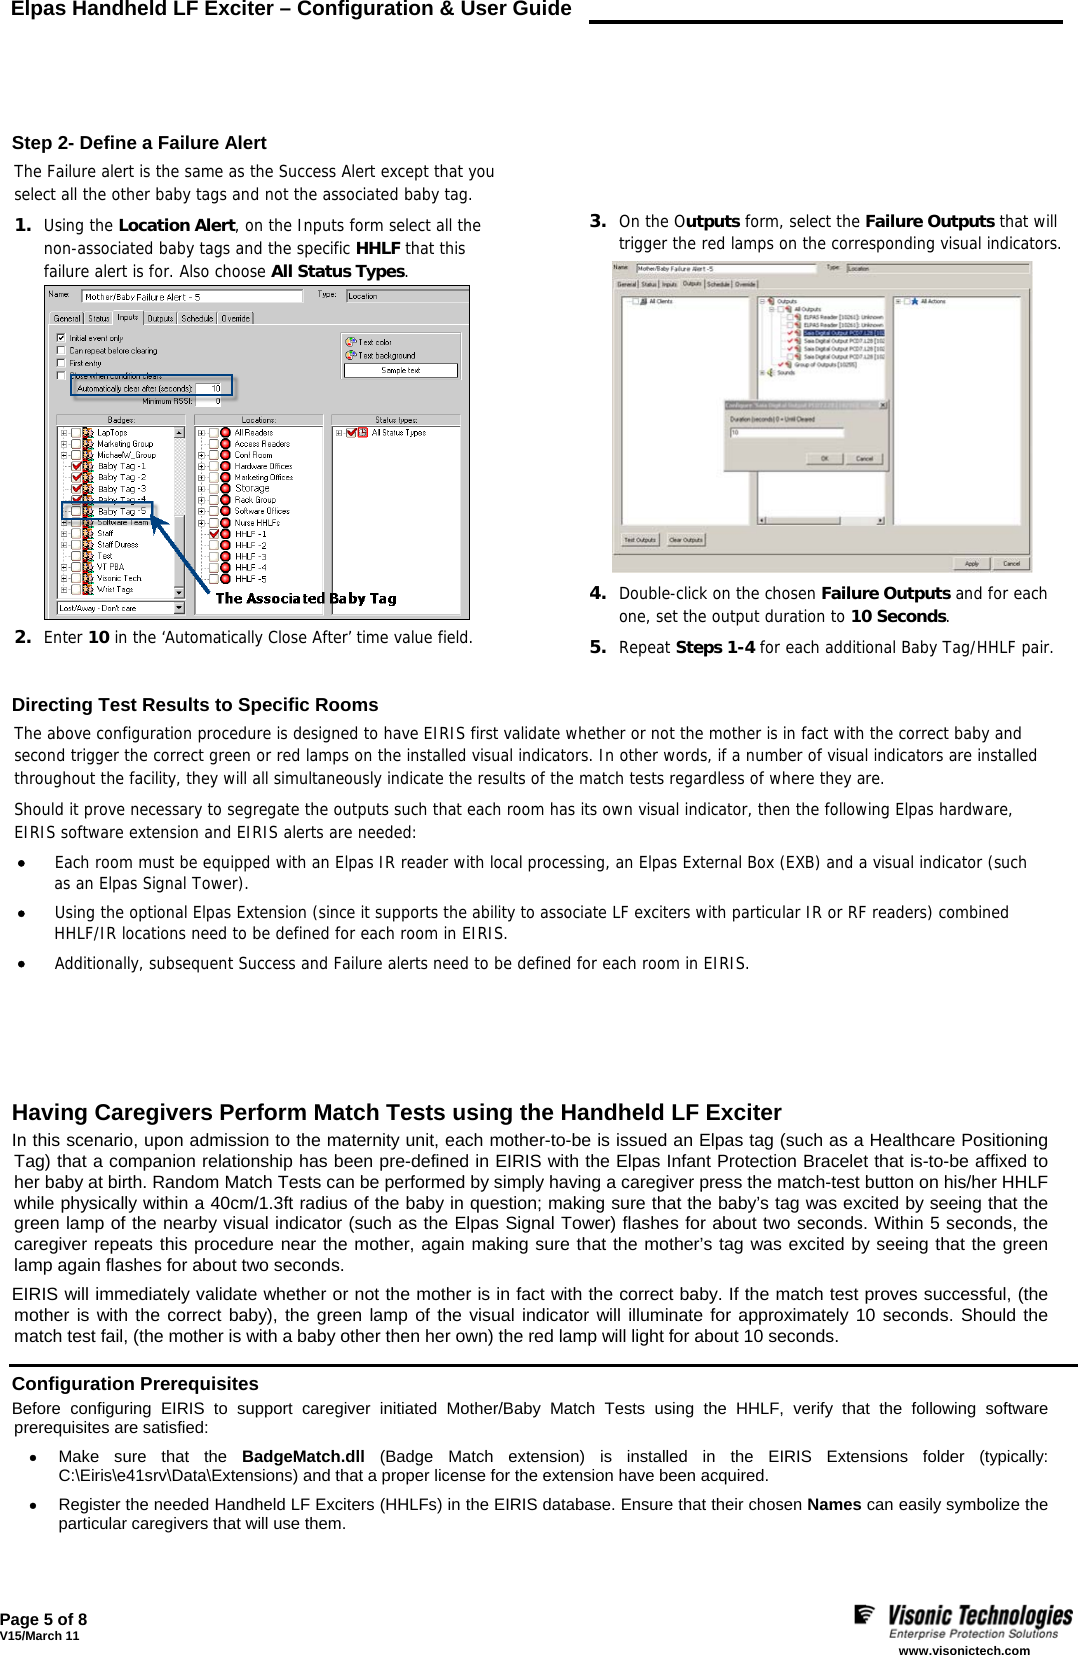 Elpas Handheld LF Exciter – Configuration &amp; User Guide    Page 5 of 8 V15/March 11    www.visonictech.com      Step 2- Define a Failure Alert The Failure alert is the same as the Success Alert except that you select all the other baby tags and not the associated baby tag. 1. Using the Location Alert, on the Inputs form select all the non-associated baby tags and the specific HHLF that this failure alert is for. Also choose All Status Types.  2. Enter 10 in the ‘Automatically Close After’ time value field.      3. On the Outputs form, select the Failure Outputs that will trigger the red lamps on the corresponding visual indicators.  4. Double-click on the chosen Failure Outputs and for each one, set the output duration to 10 Seconds. 5. Repeat Steps 1-4 for each additional Baby Tag/HHLF pair.   Directing Test Results to Specific Rooms The above configuration procedure is designed to have EIRIS first validate whether or not the mother is in fact with the correct baby and second trigger the correct green or red lamps on the installed visual indicators. In other words, if a number of visual indicators are installed throughout the facility, they will all simultaneously indicate the results of the match tests regardless of where they are. Should it prove necessary to segregate the outputs such that each room has its own visual indicator, then the following Elpas hardware,  EIRIS software extension and EIRIS alerts are needed: • Each room must be equipped with an Elpas IR reader with local processing, an Elpas External Box (EXB) and a visual indicator (such  as an Elpas Signal Tower). • Using the optional Elpas Extension (since it supports the ability to associate LF exciters with particular IR or RF readers) combined HHLF/IR locations need to be defined for each room in EIRIS. • Additionally, subsequent Success and Failure alerts need to be defined for each room in EIRIS.             Having Caregivers Perform Match Tests using the Handheld LF Exciter In this scenario, upon admission to the maternity unit, each mother-to-be is issued an Elpas tag (such as a Healthcare Positioning Tag) that a companion relationship has been pre-defined in EIRIS with the Elpas Infant Protection Bracelet that is-to-be affixed to her baby at birth. Random Match Tests can be performed by simply having a caregiver press the match-test button on his/her HHLF while physically within a 40cm/1.3ft radius of the baby in question; making sure that the baby’s tag was excited by seeing that the green lamp of the nearby visual indicator (such as the Elpas Signal Tower) flashes for about two seconds. Within 5 seconds, the caregiver repeats this procedure near the mother, again making sure that the mother’s tag was excited by seeing that the green lamp again flashes for about two seconds. EIRIS will immediately validate whether or not the mother is in fact with the correct baby. If the match test proves successful, (the mother is with the correct baby), the green lamp of the visual indicator will illuminate for approximately 10 seconds. Should the match test fail, (the mother is with a baby other then her own) the red lamp will light for about 10 seconds.  Configuration Prerequisites  Before configuring EIRIS to support caregiver initiated Mother/Baby Match Tests using the HHLF, verify that the following software prerequisites are satisfied: • Make sure that the BadgeMatch.dll (Badge Match extension) is installed in the EIRIS Extensions folder (typically: C:\Eiris\e41srv\Data\Extensions) and that a proper license for the extension have been acquired. • Register the needed Handheld LF Exciters (HHLFs) in the EIRIS database. Ensure that their chosen Names can easily symbolize the particular caregivers that will use them. 